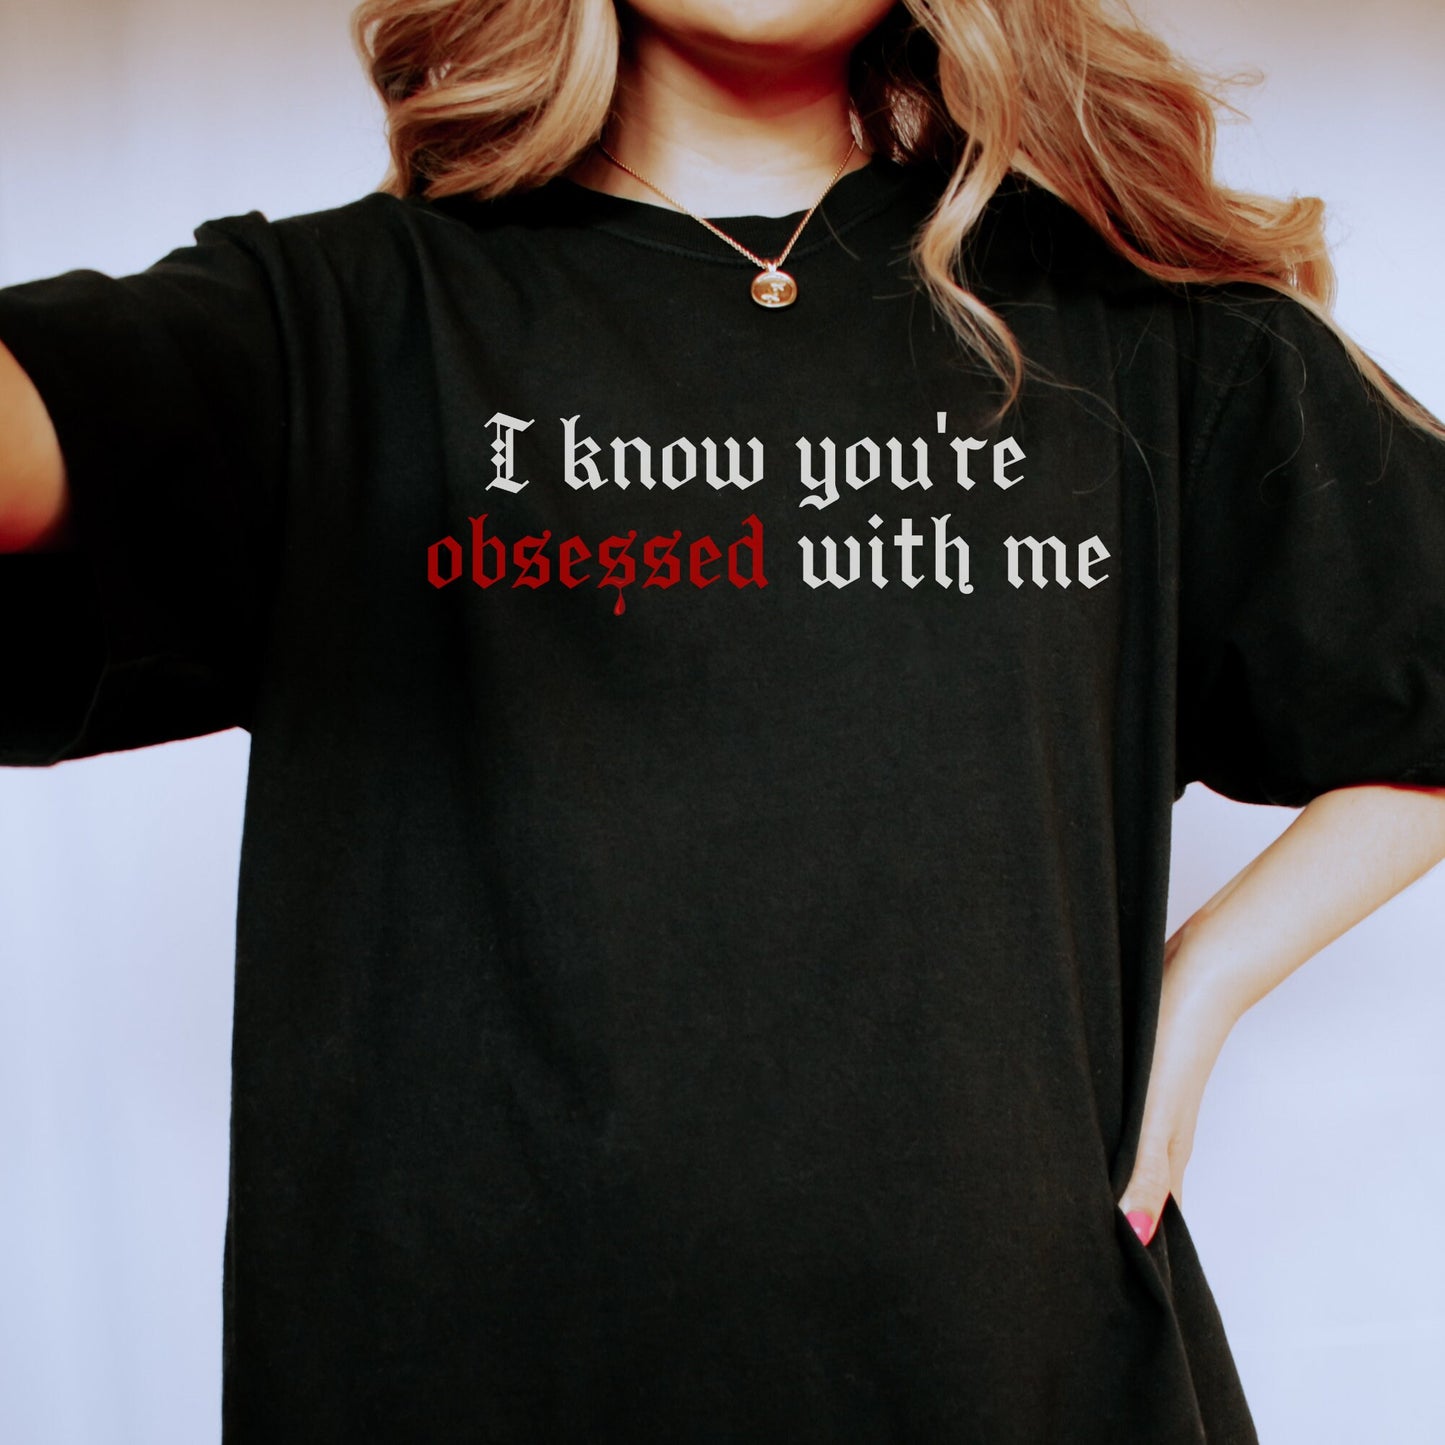 TVD Shirt,  Damon Salvatore shirt, tvd fan gift, The Vampire Diaries shirt, TVD Fan, TVD xmas gift, I know you're obsessed with me